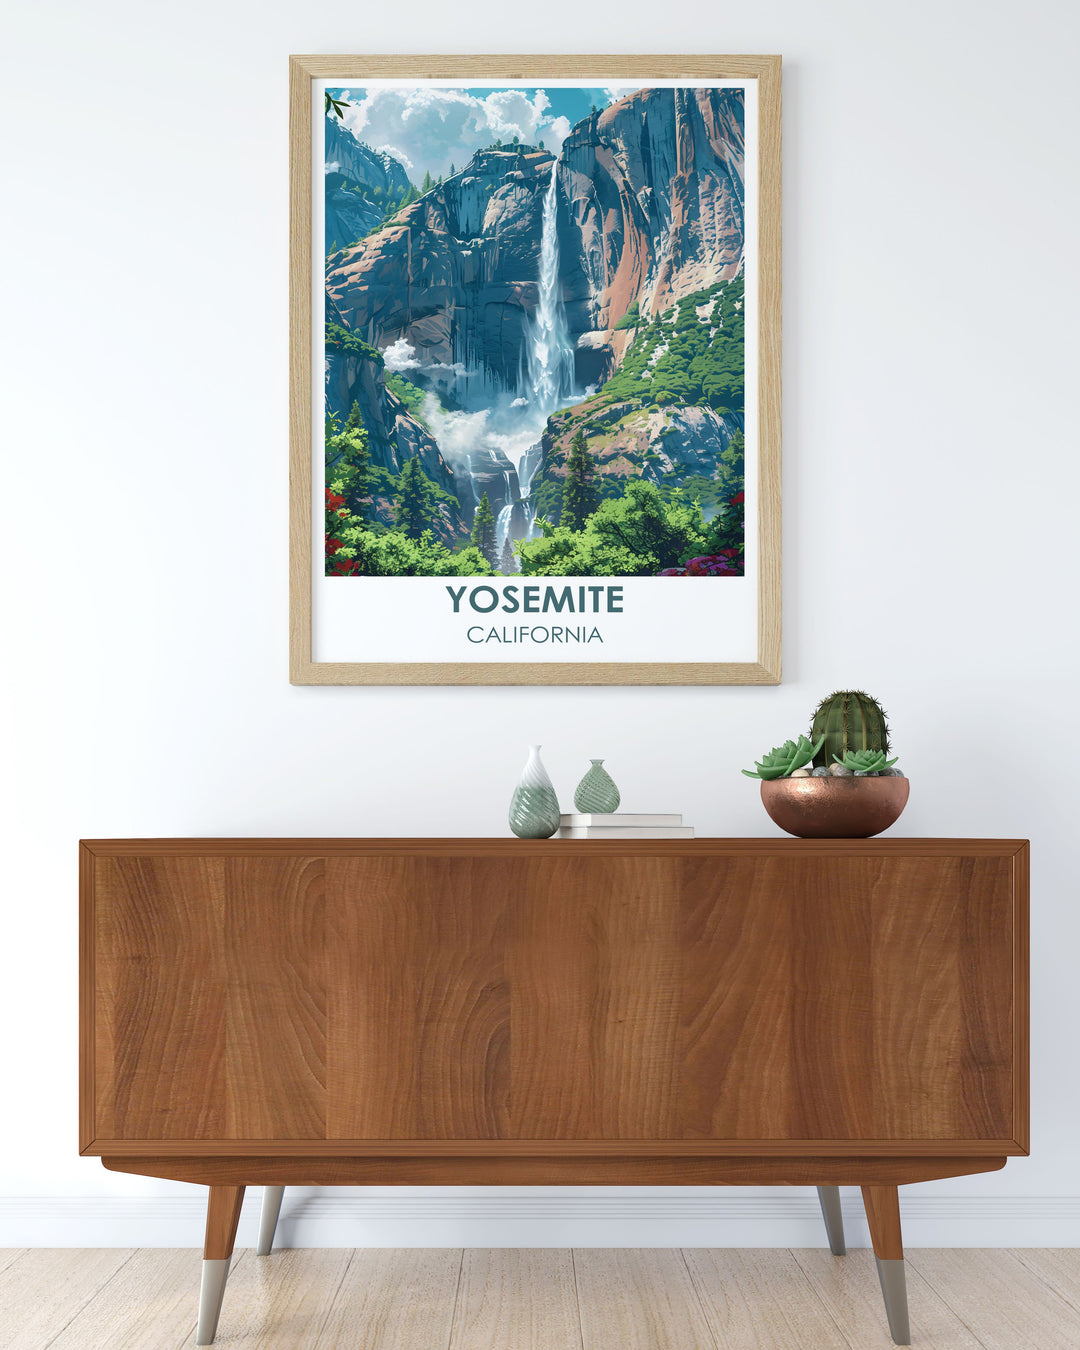 The dynamic energy of Yosemite Falls is captured in this travel poster, with detailed illustrations of the cascading water and the mist rising from the base, perfect for nature lovers and adventure seekers.